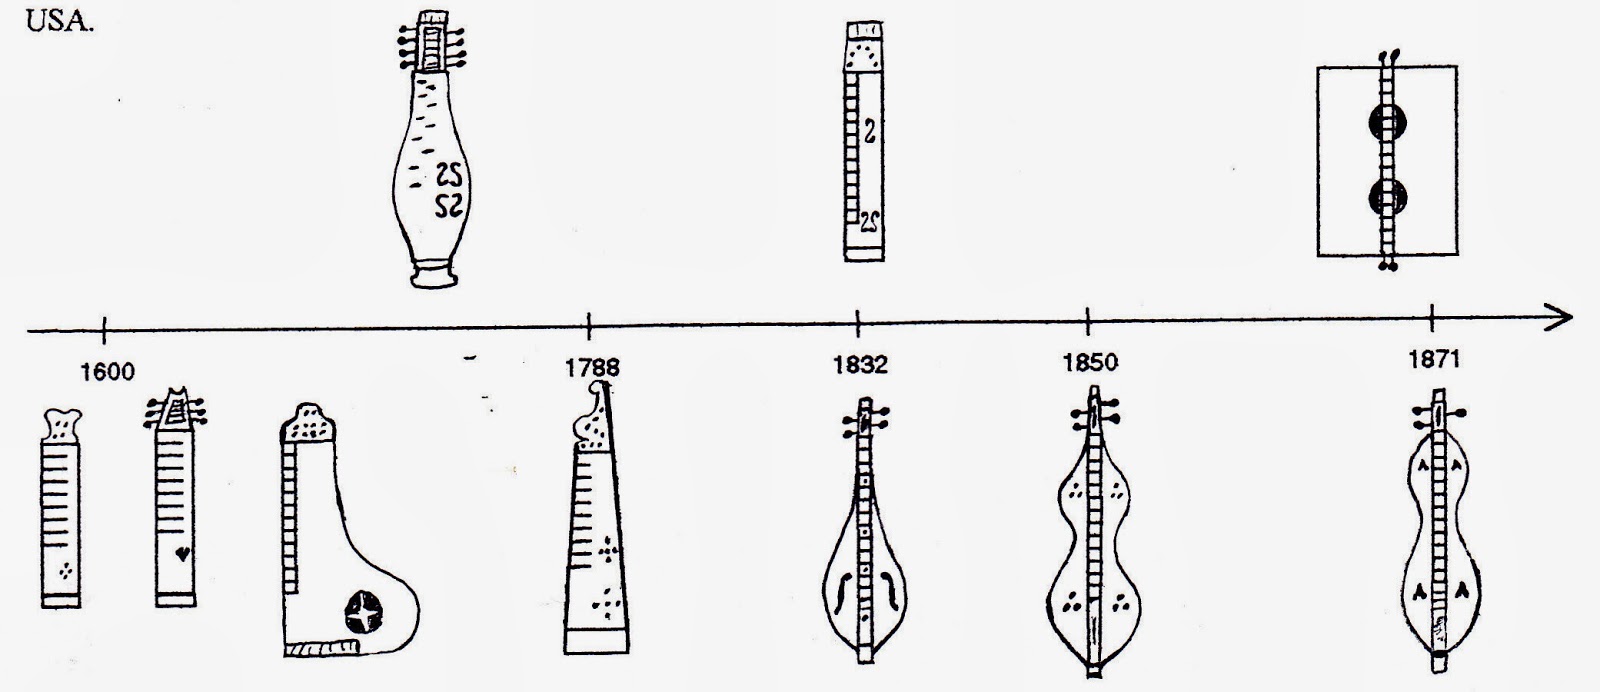 Timeline showing development of folk zithers, from German scheitholt ...